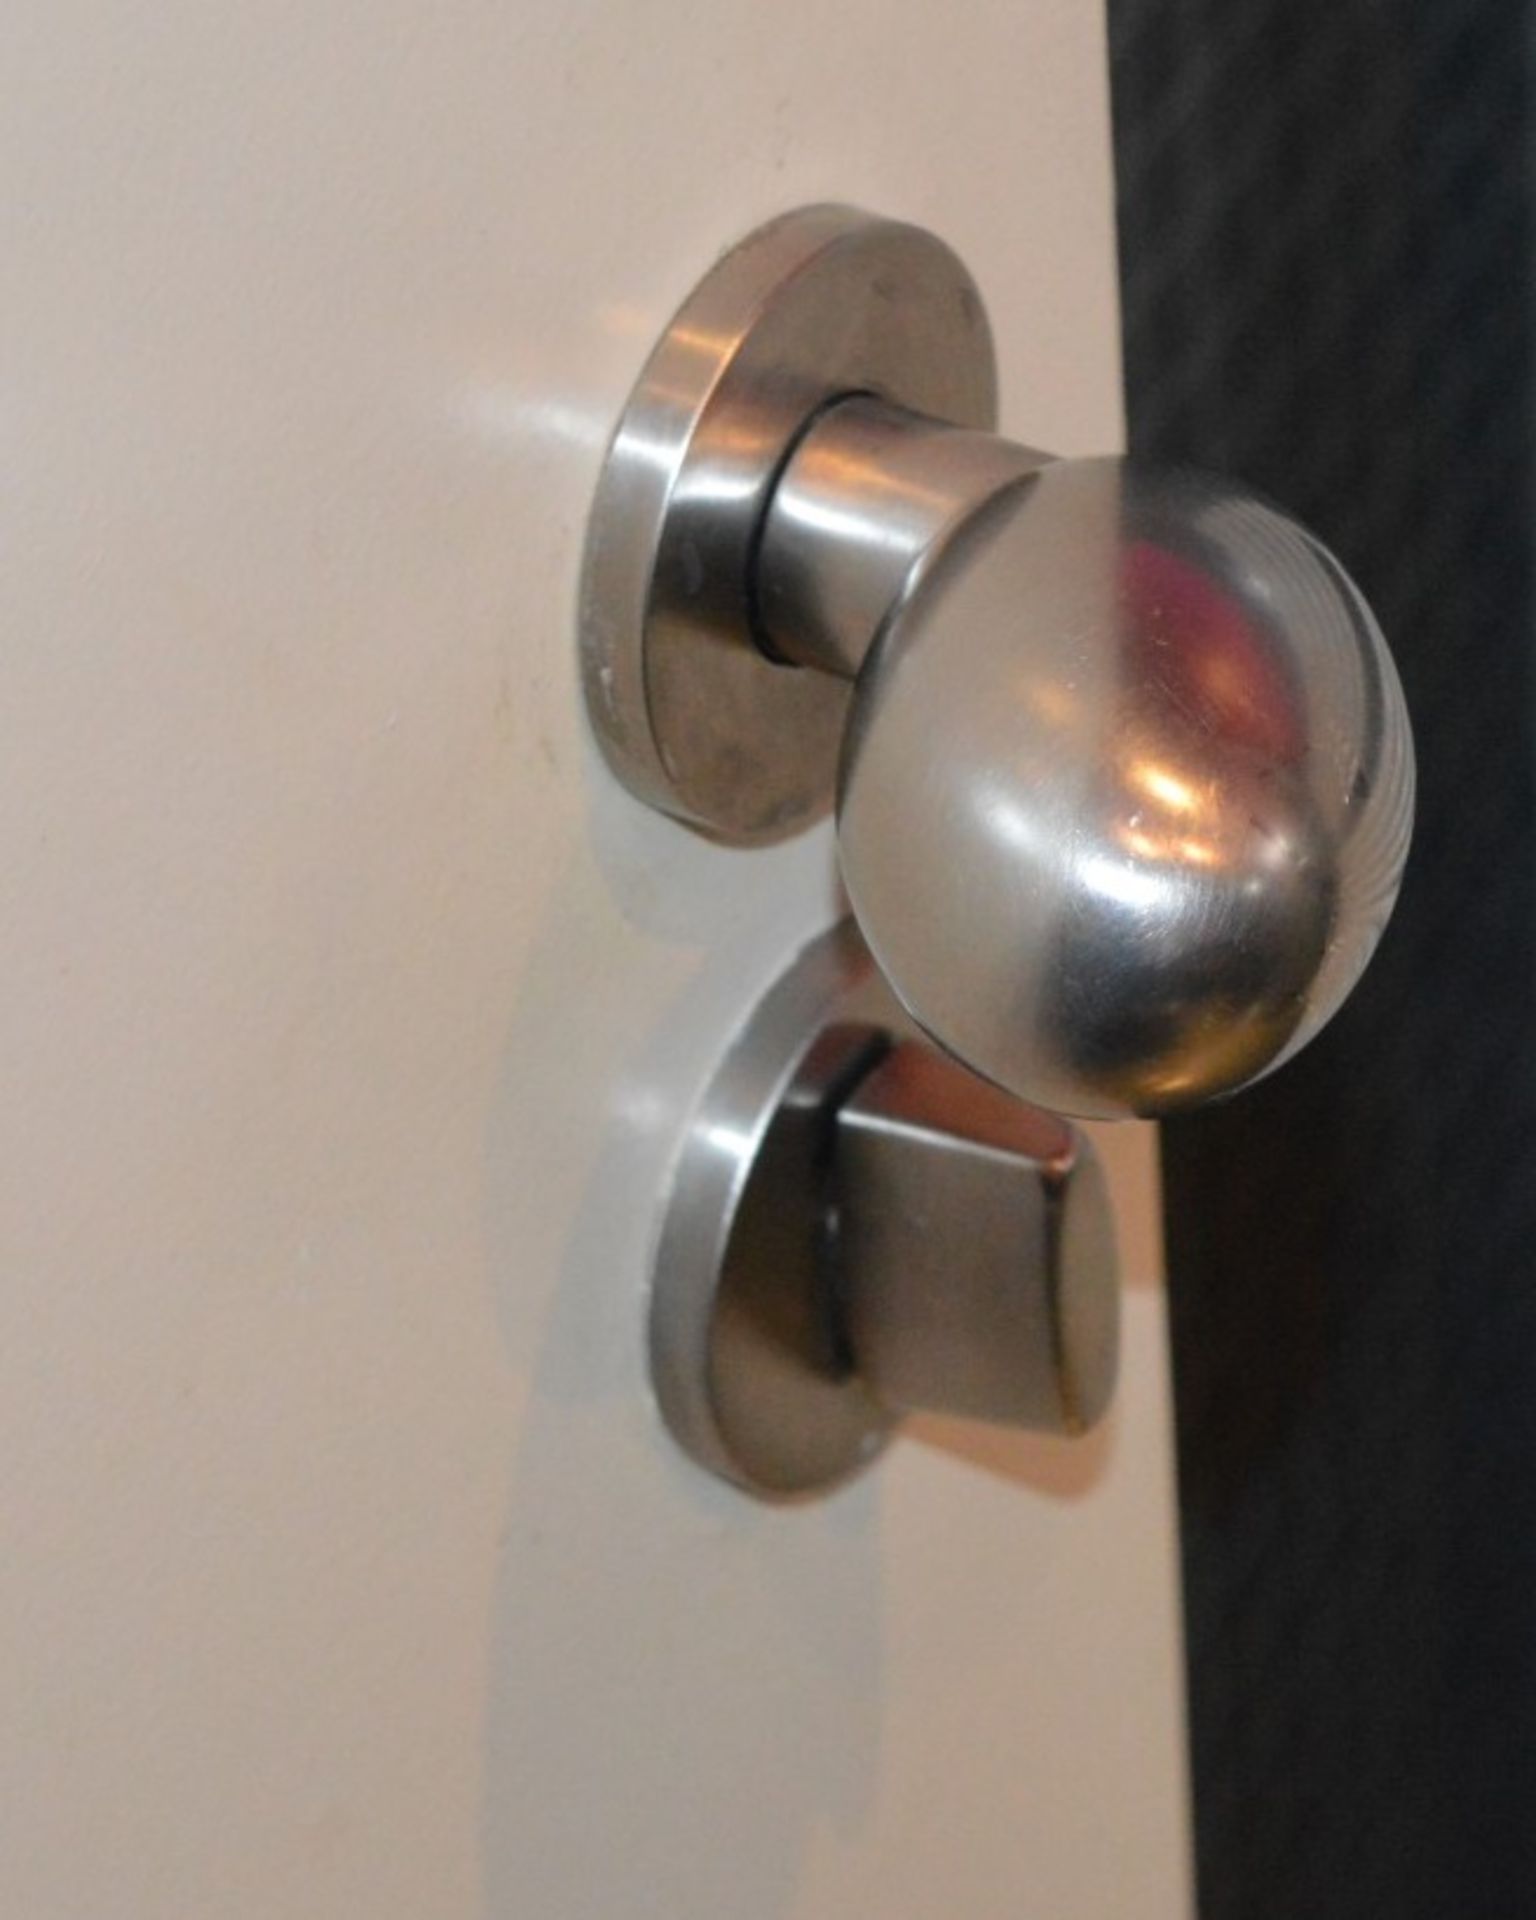 1 x Fire Resistant Internal Door - Fitted With Stylish Chrome Door Knobs, Triple Hinges and - Image 4 of 6